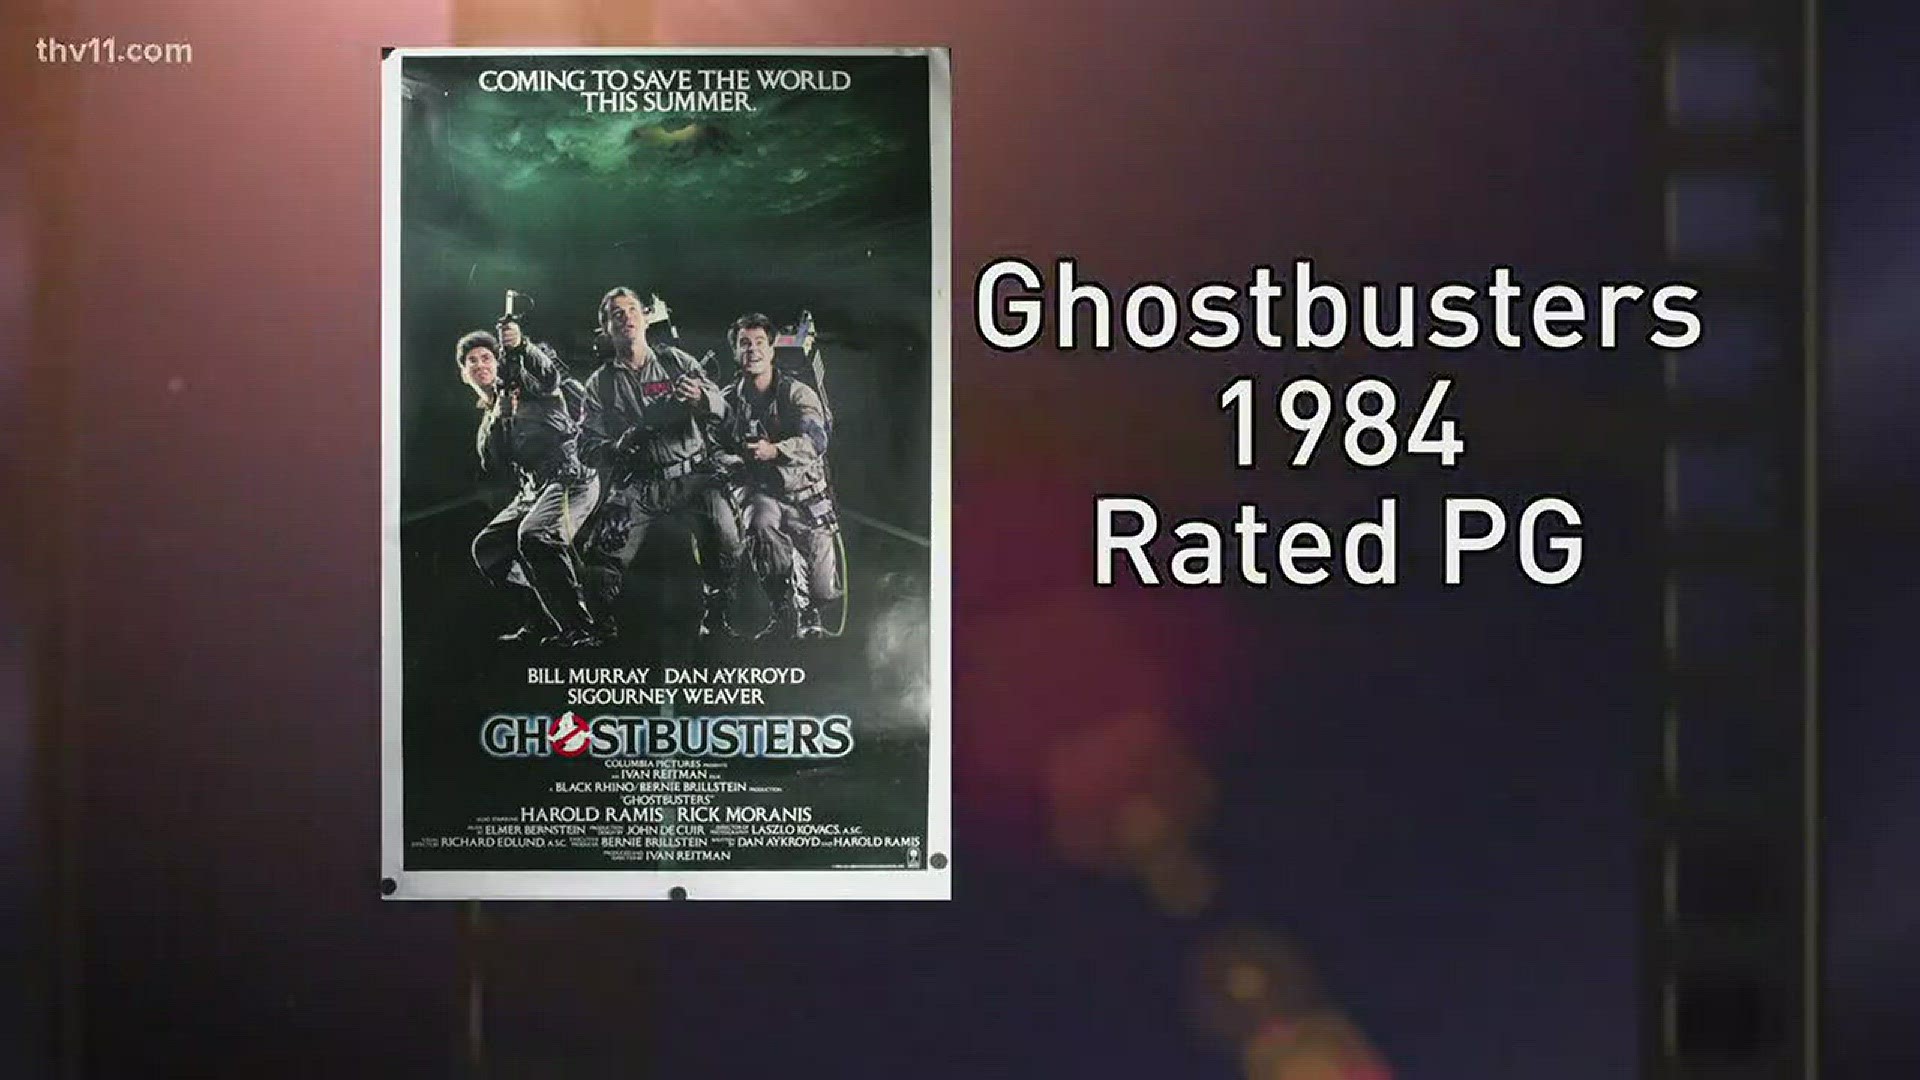 If you need some ideas for what to watch on this Halloween night, THV11 Movie critic Jonathan Nettles is here with his picks.